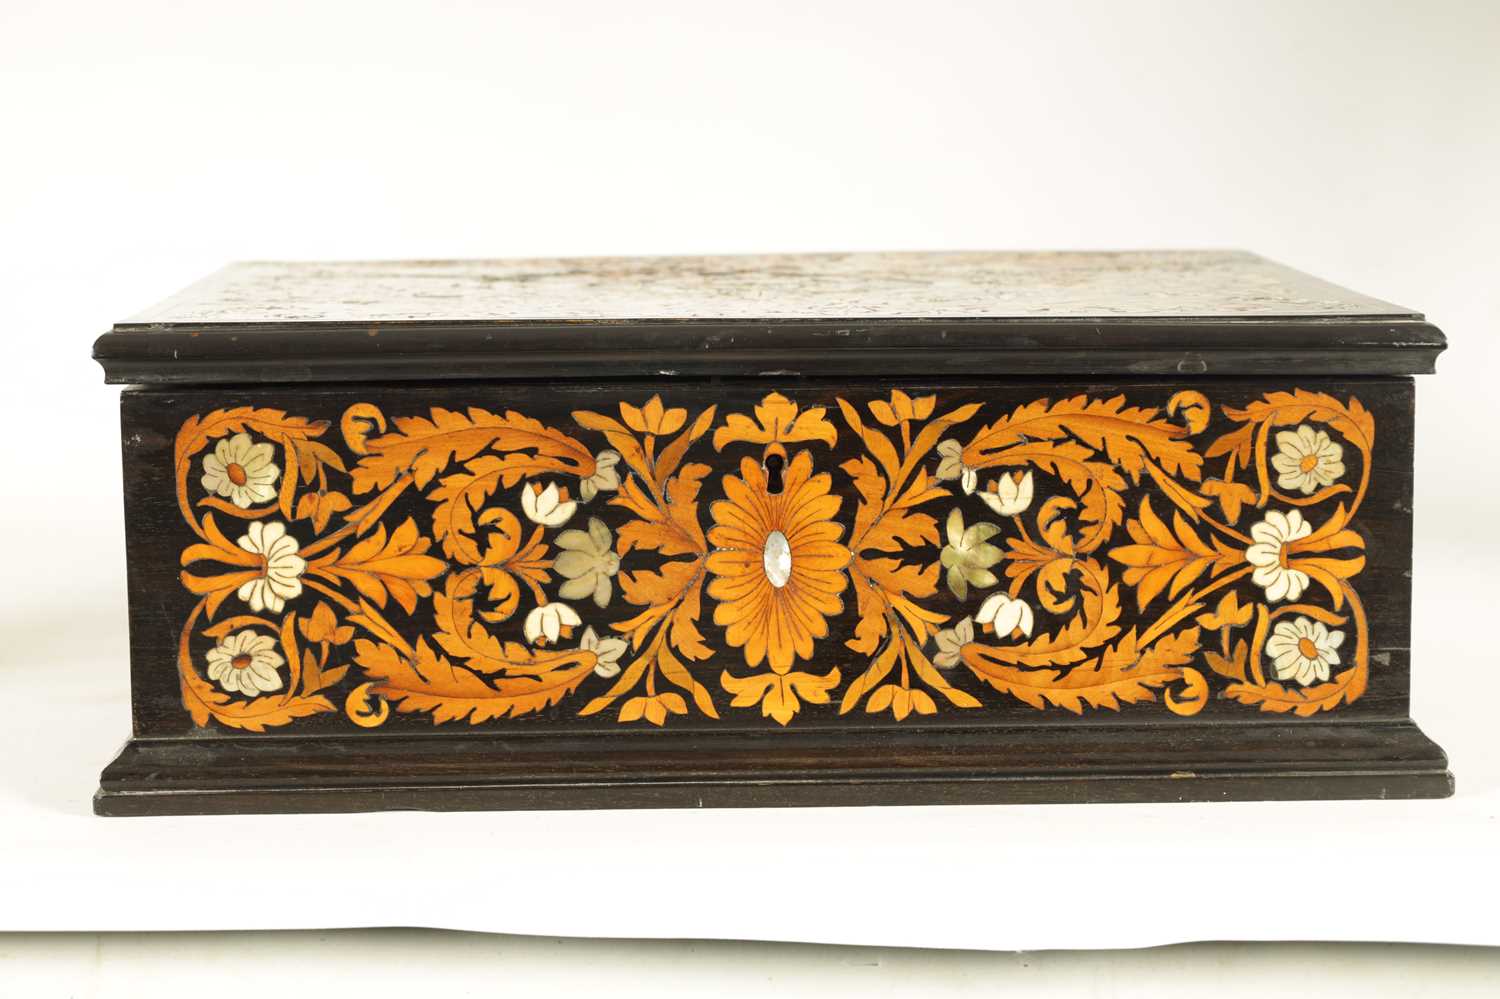 A FINE 18TH/19TH CENTURY ITALIAN FLORAL MARQUETRY EBONY, IVORY AND MOTHER OF PEARL INLAID TABLE BOX - Image 4 of 9